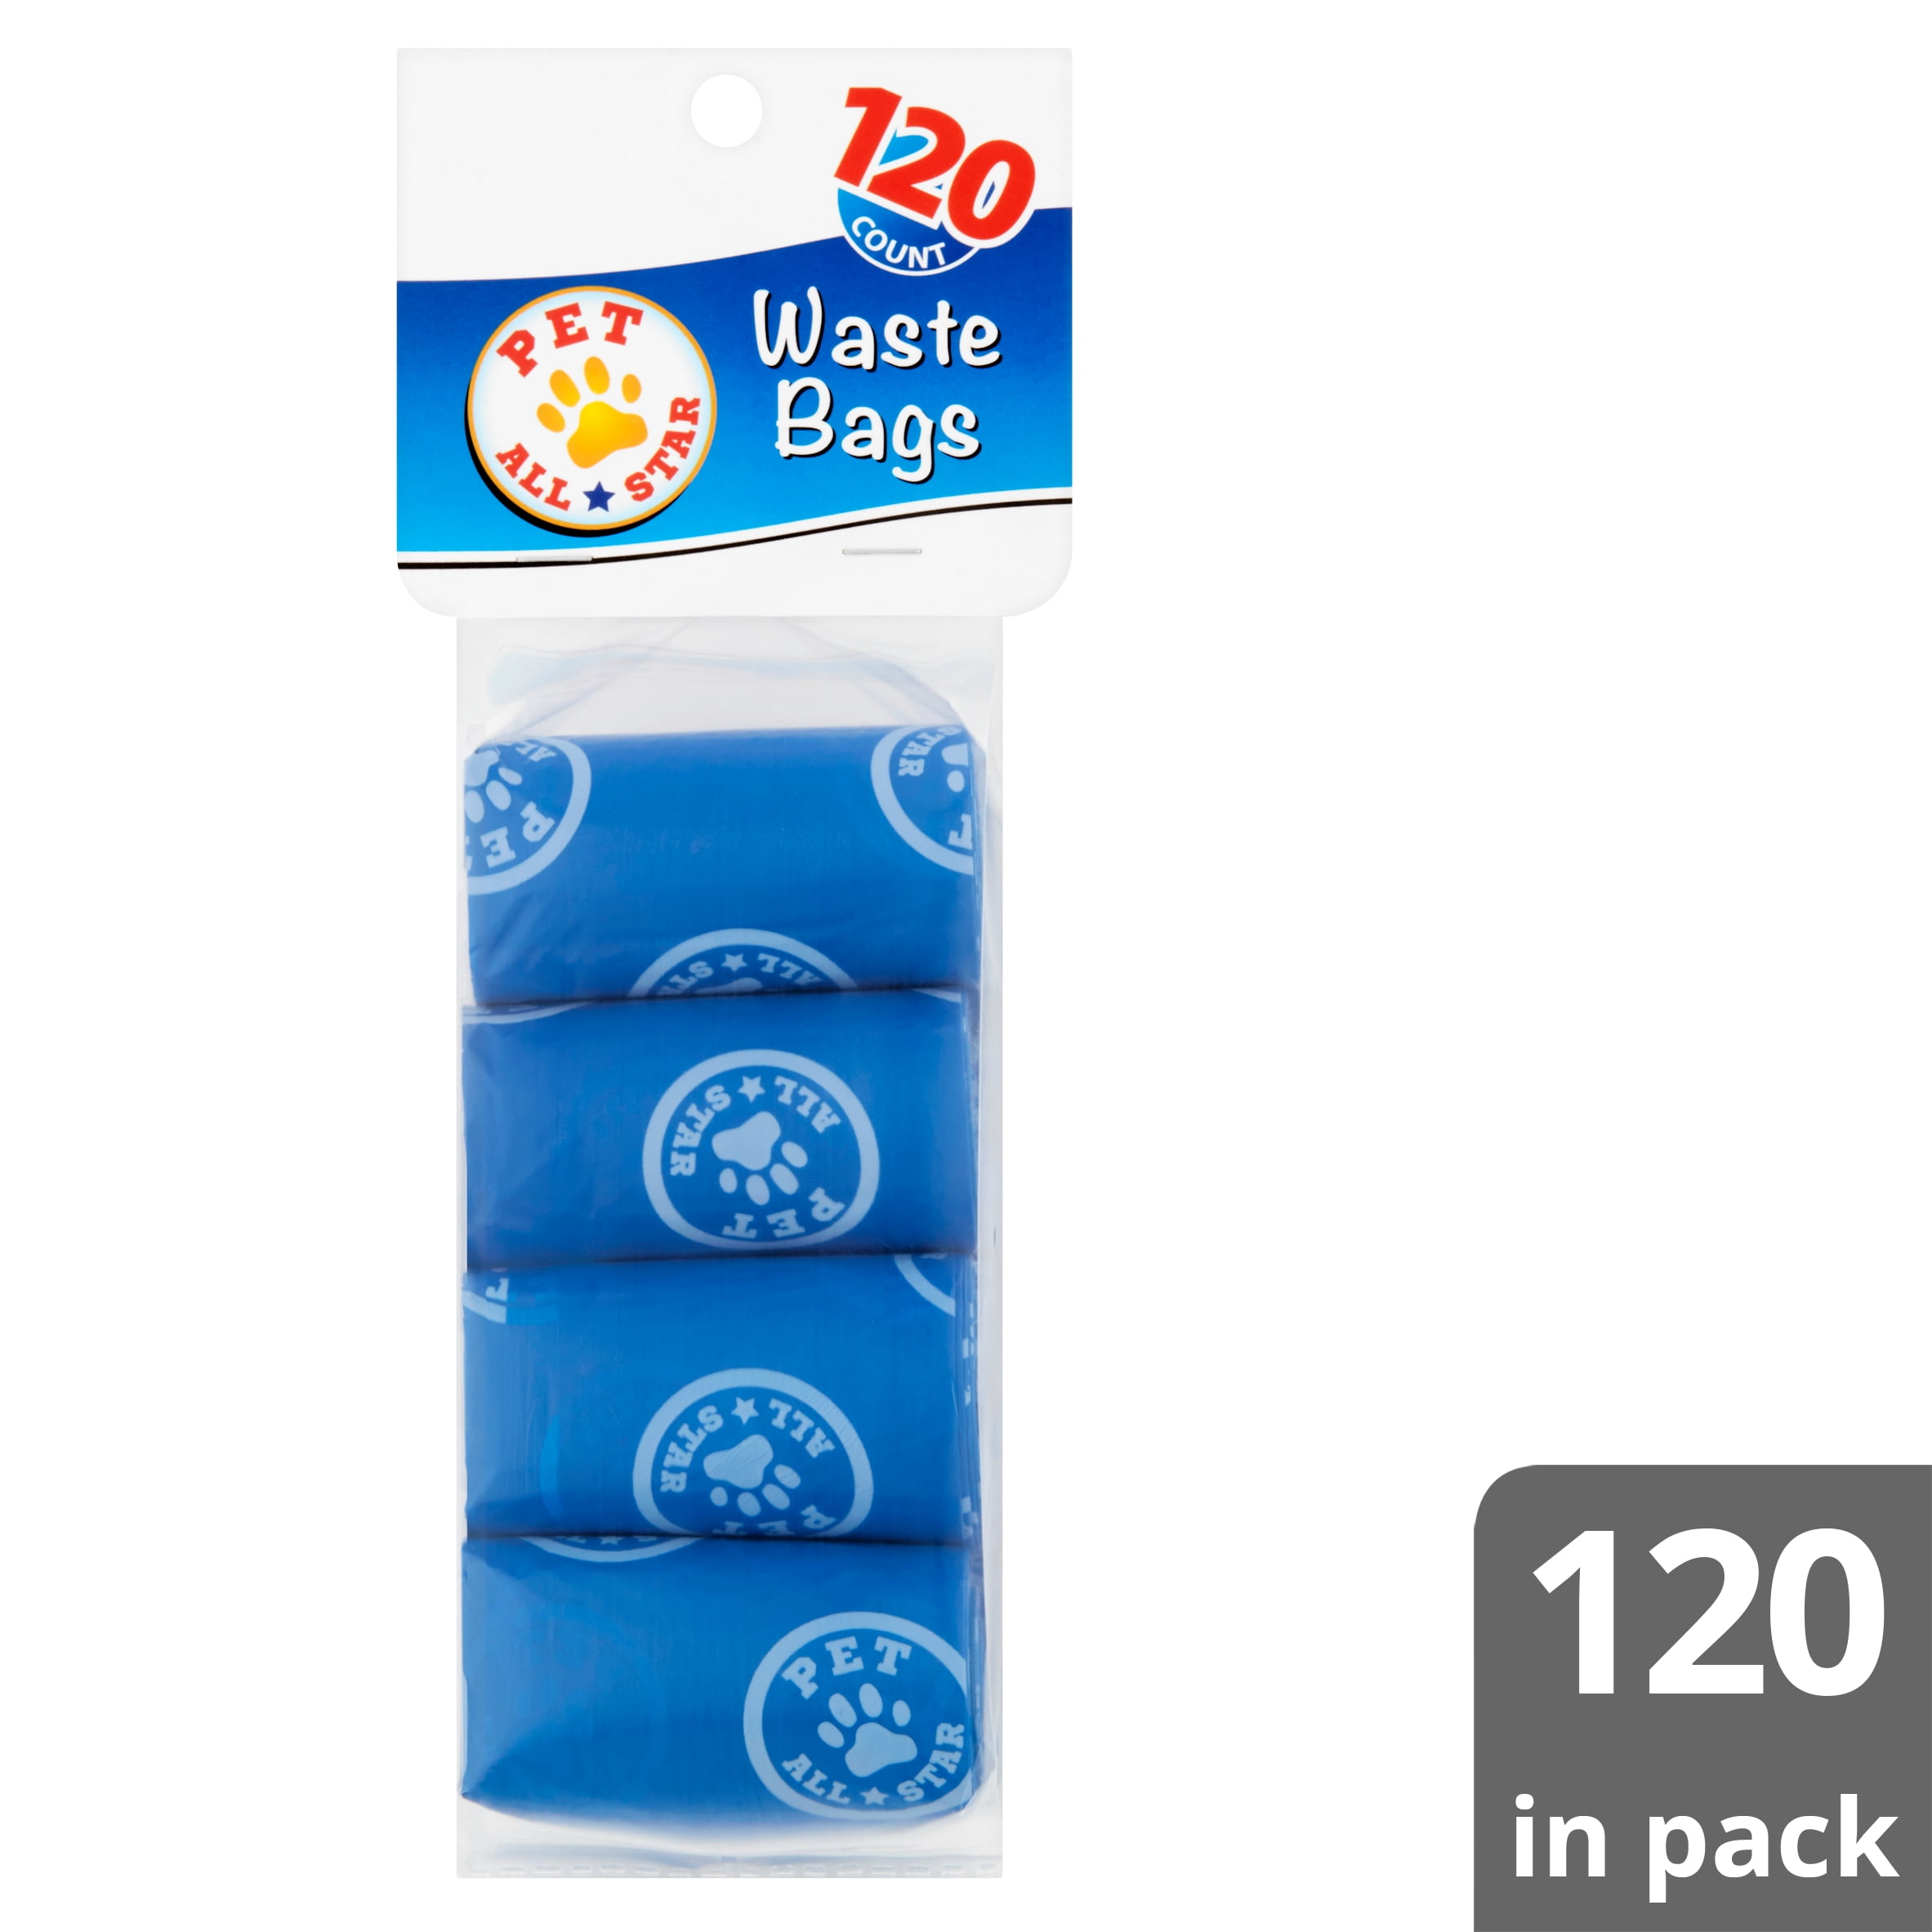 Pet All Star Waste Bags, 120 count 